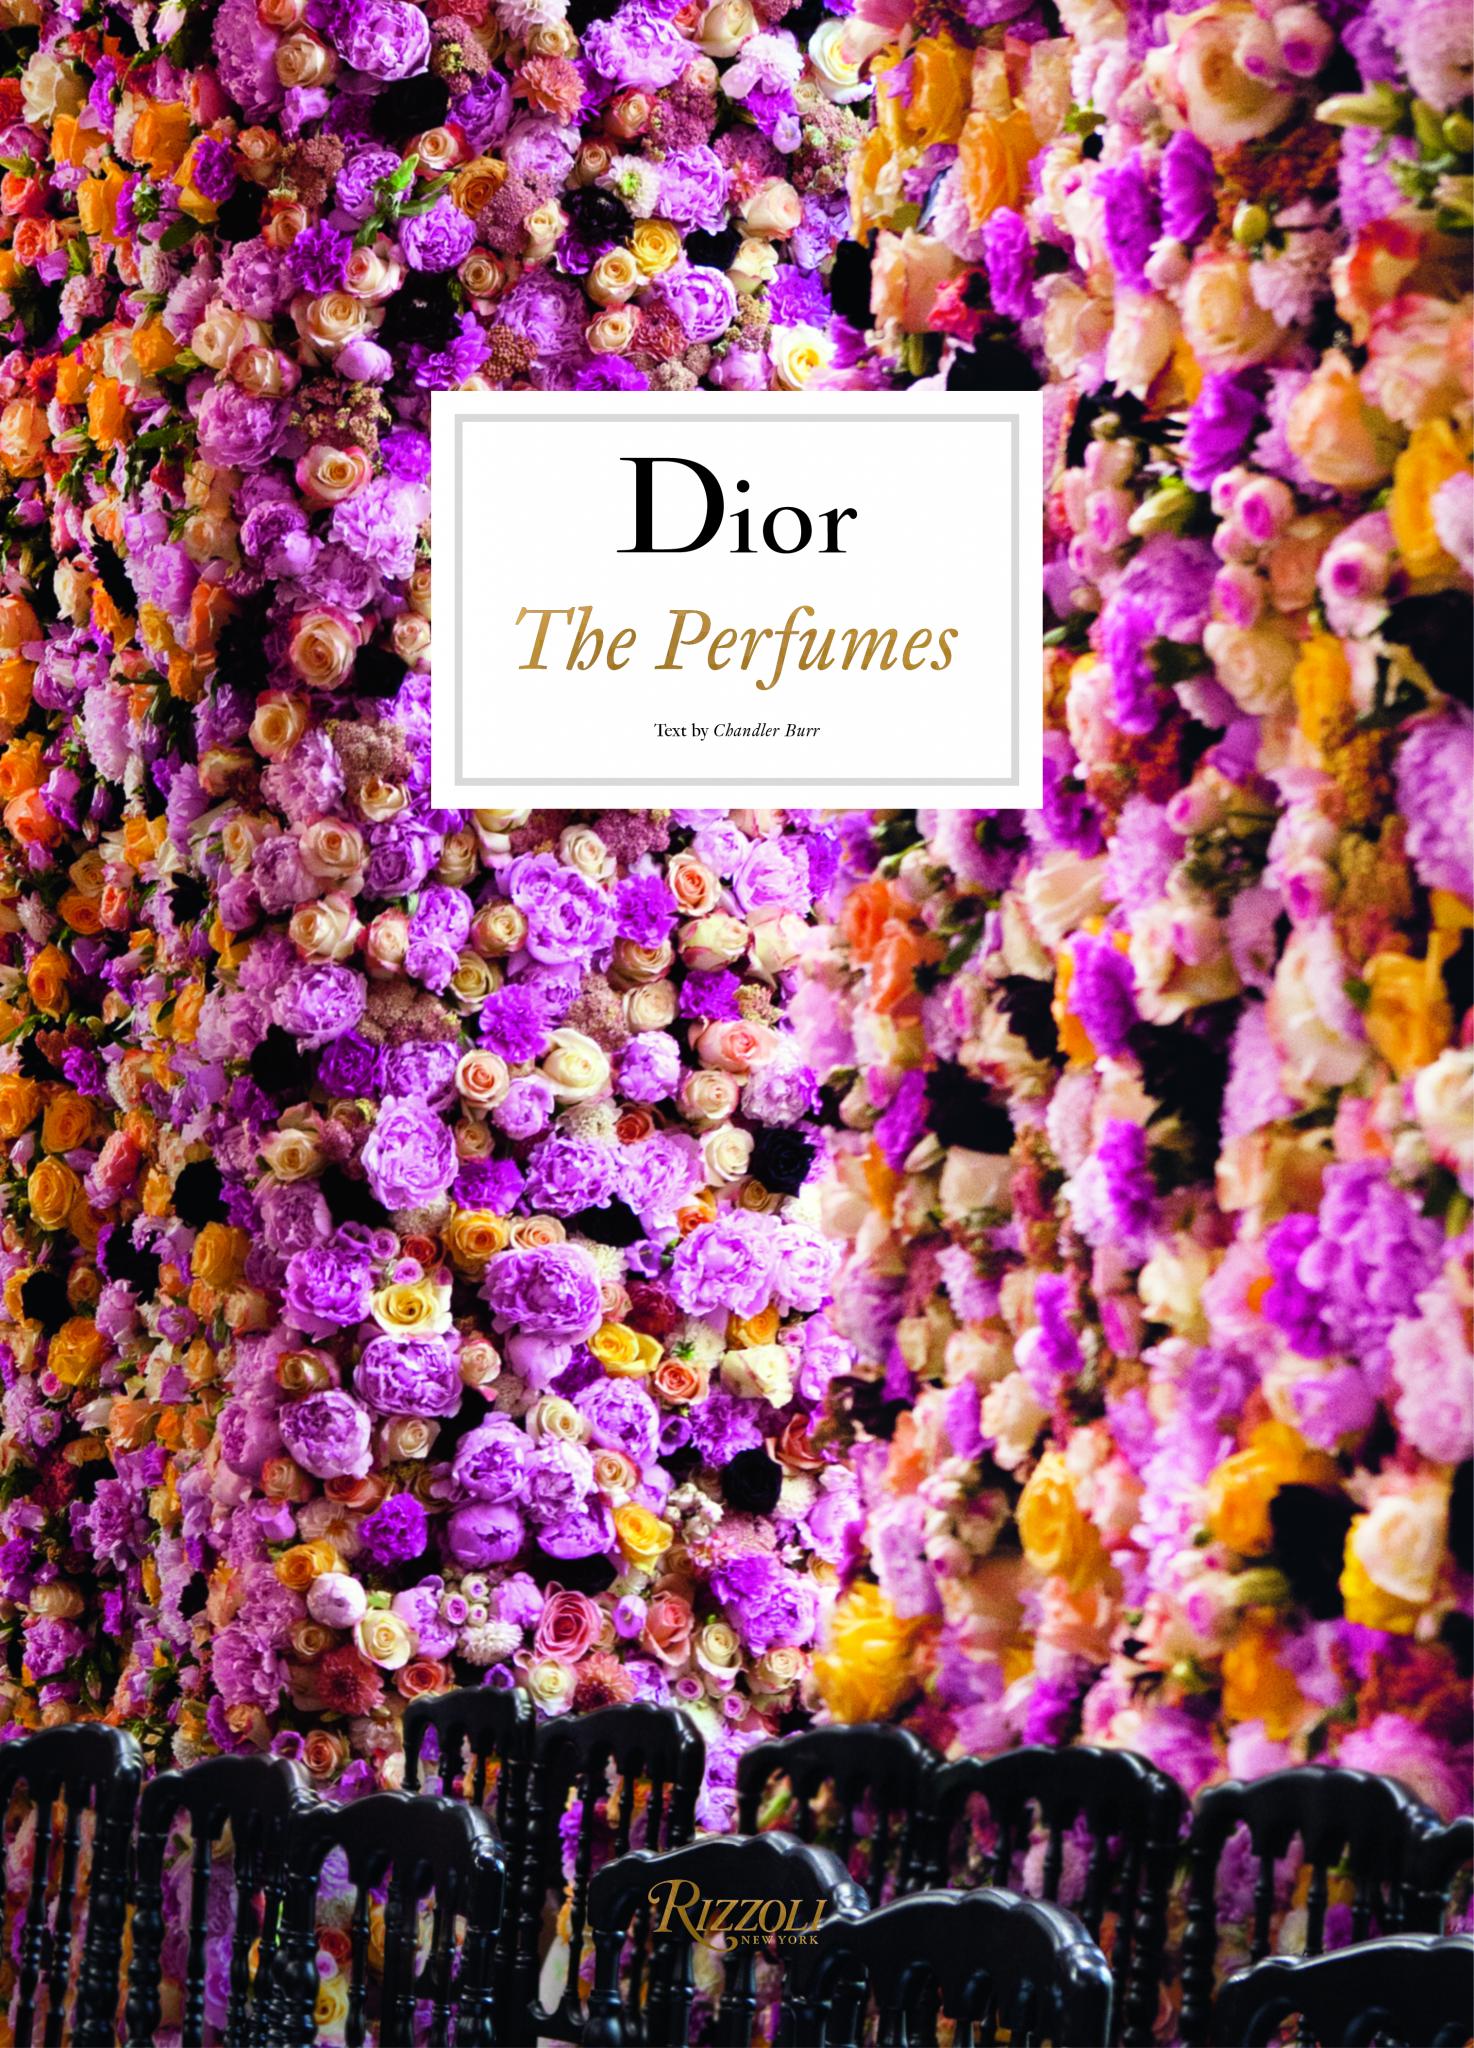 New Book Release, 'Dior: The Perfumes' Talks Man Behind the Brand